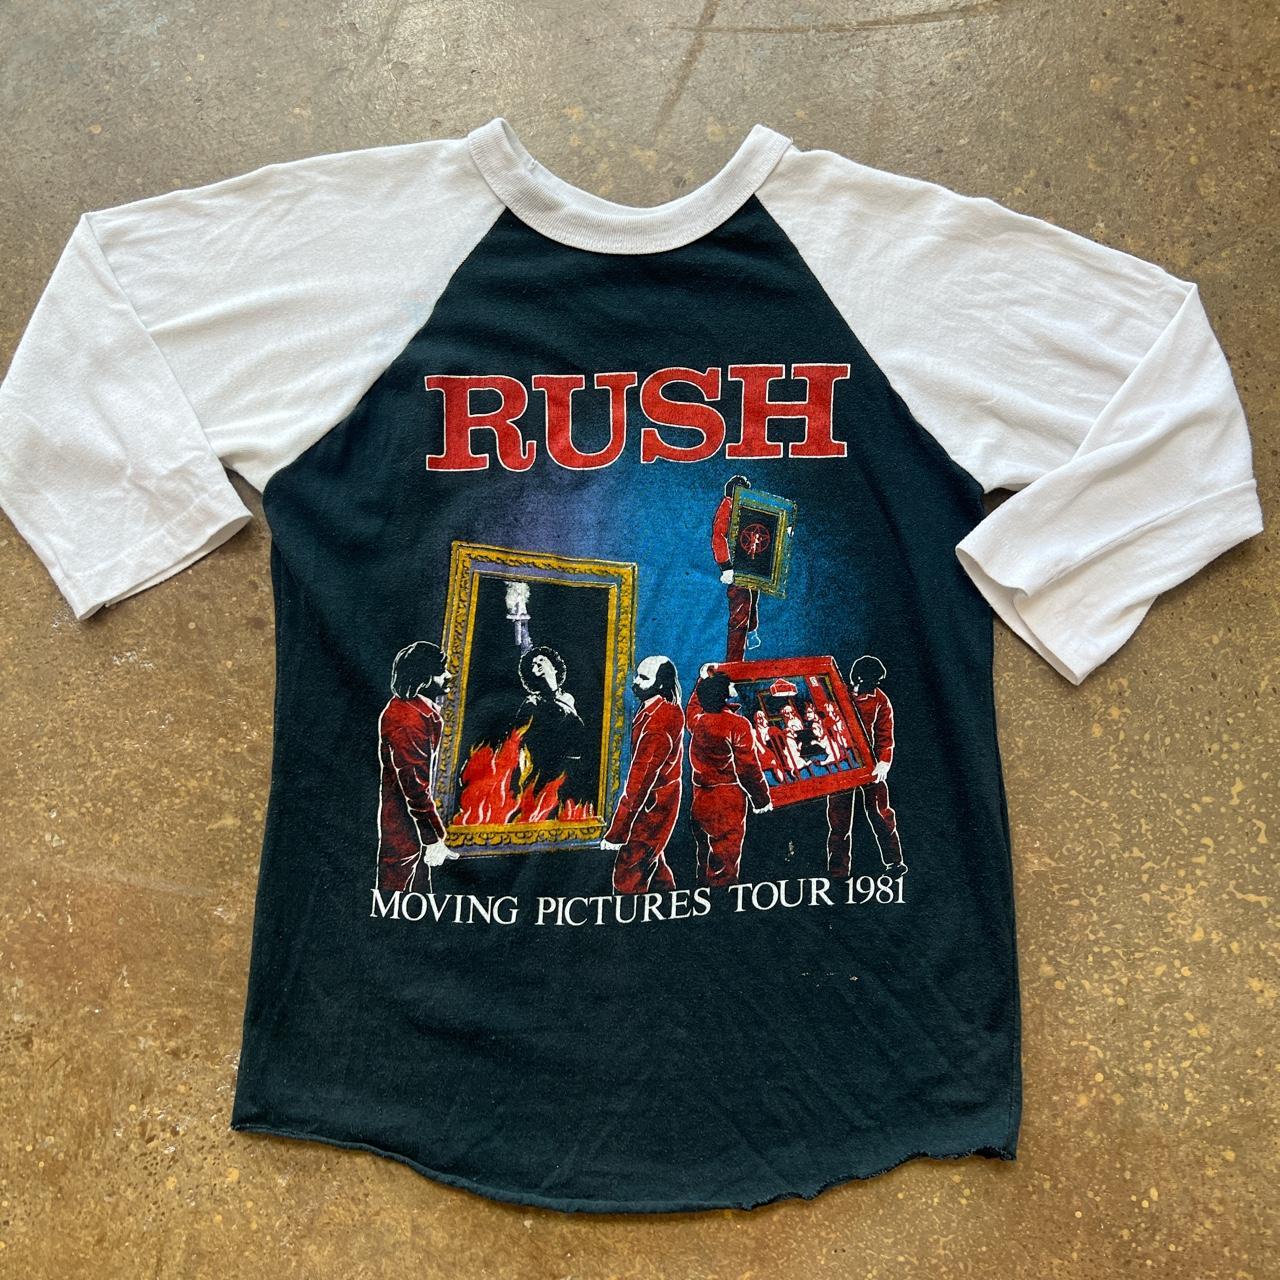 Vintage 1980s rush moving pictures 1981 tour...